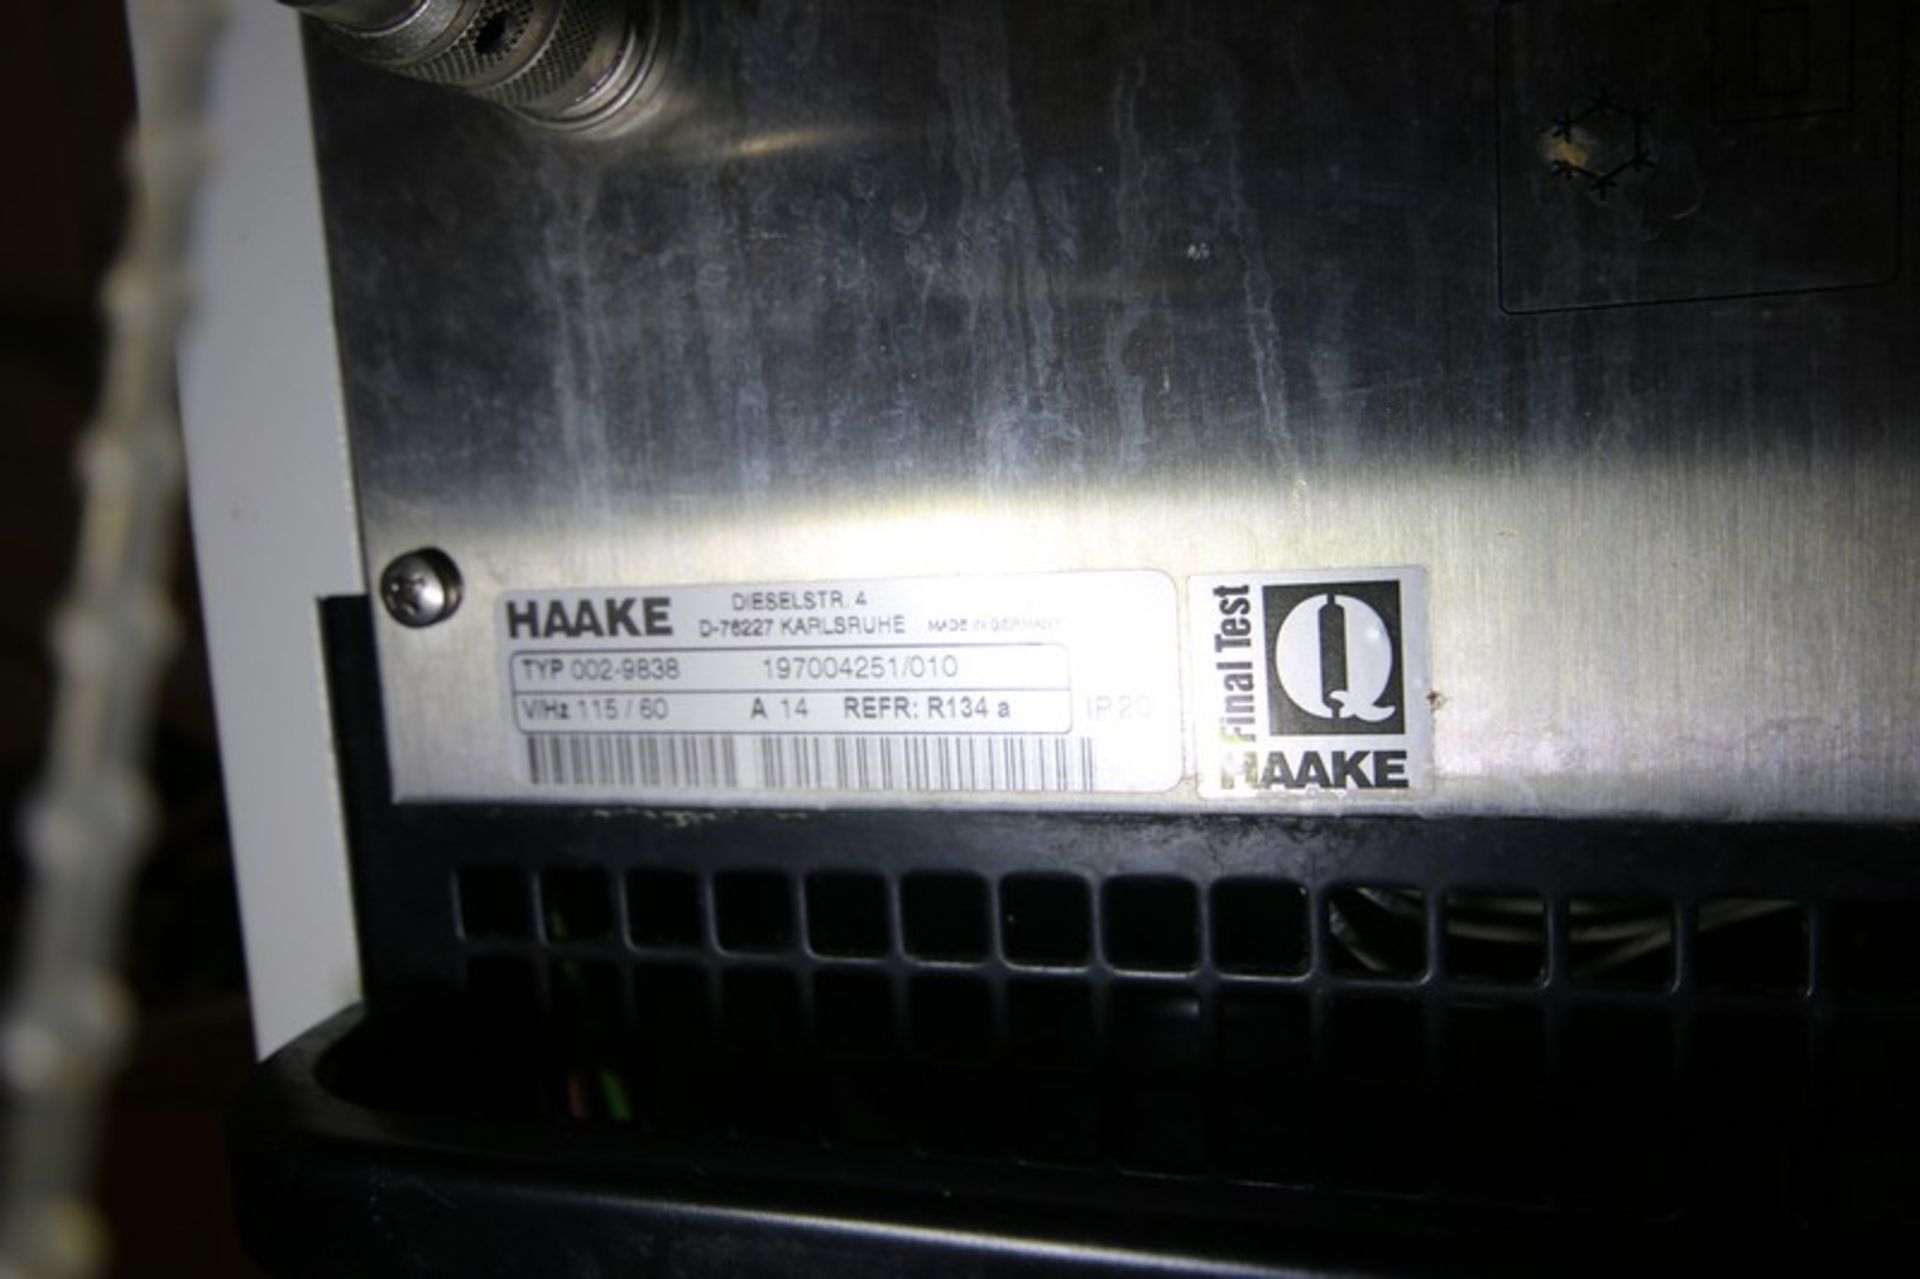 Haake F6 Circulator with C25 Circulating Water Bath, Type 002-9838, SN 197003780/003, 115V, with - Image 5 of 5